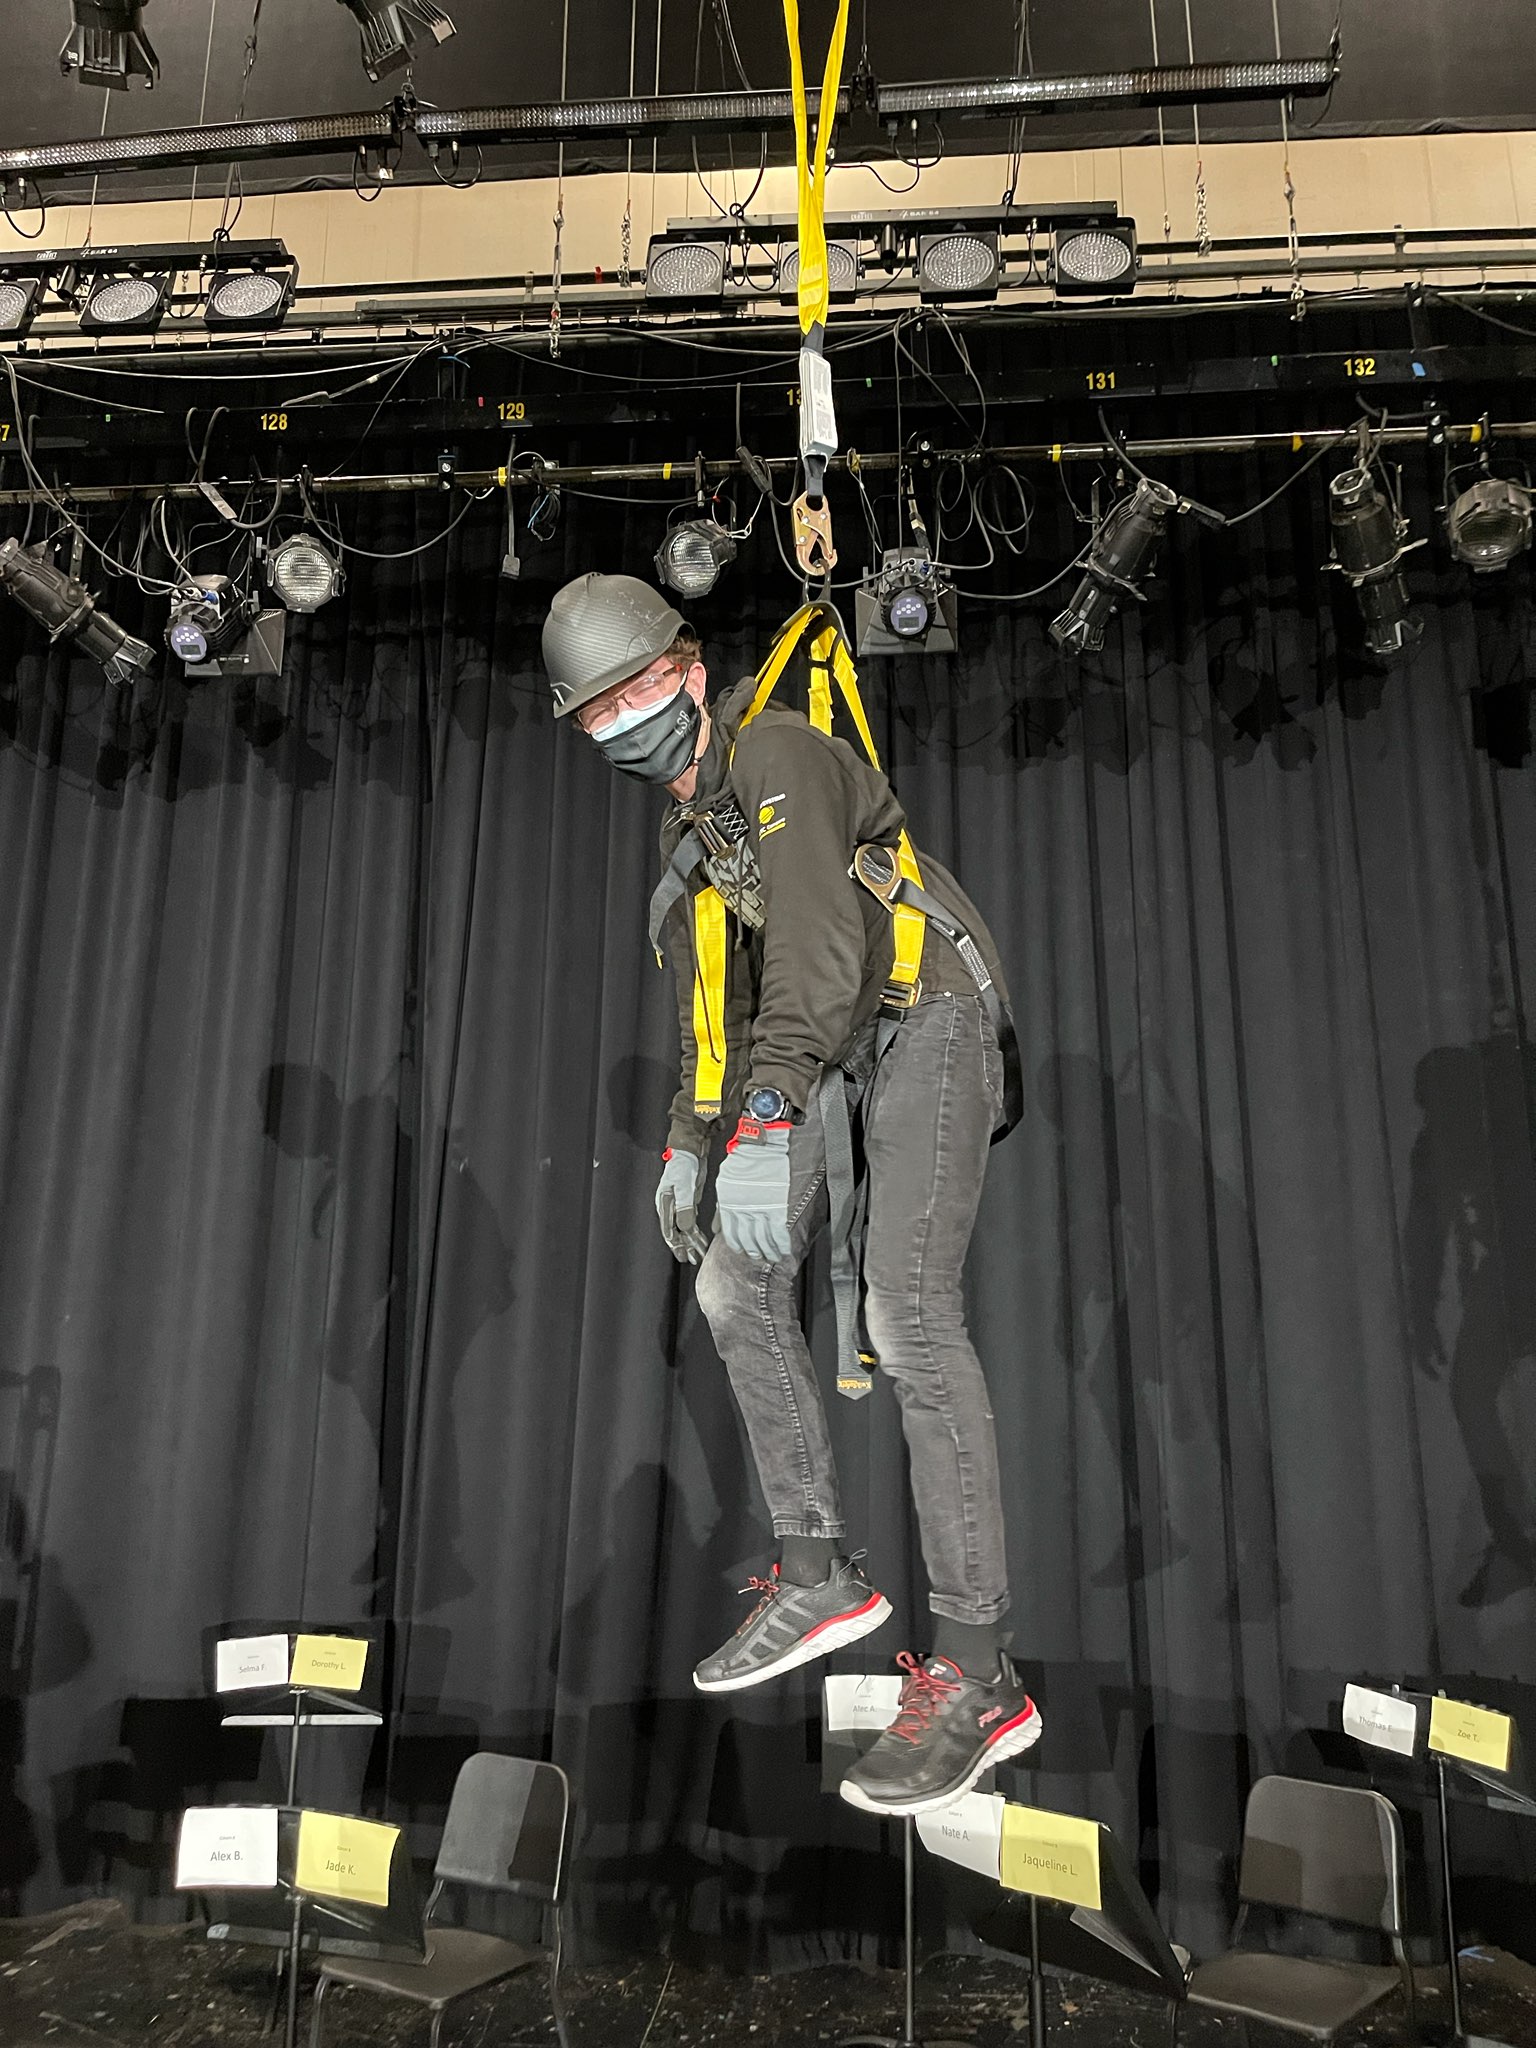 A drawing of Davin hanging via a harness.